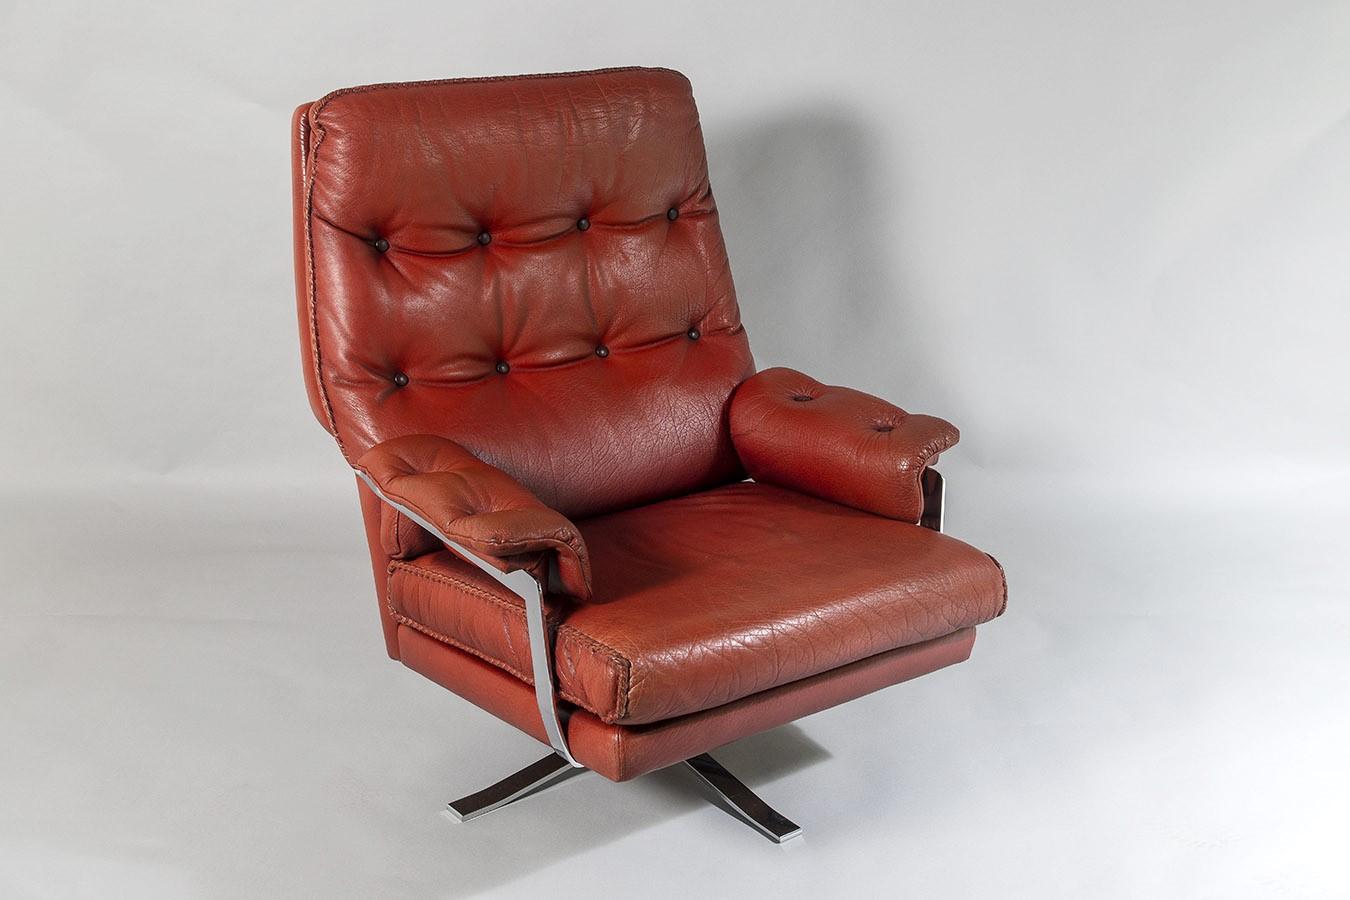 1960s Mid Centry Burnt Orange Brown Leather Swivel Chair in style of Arne Norell For Sale 2